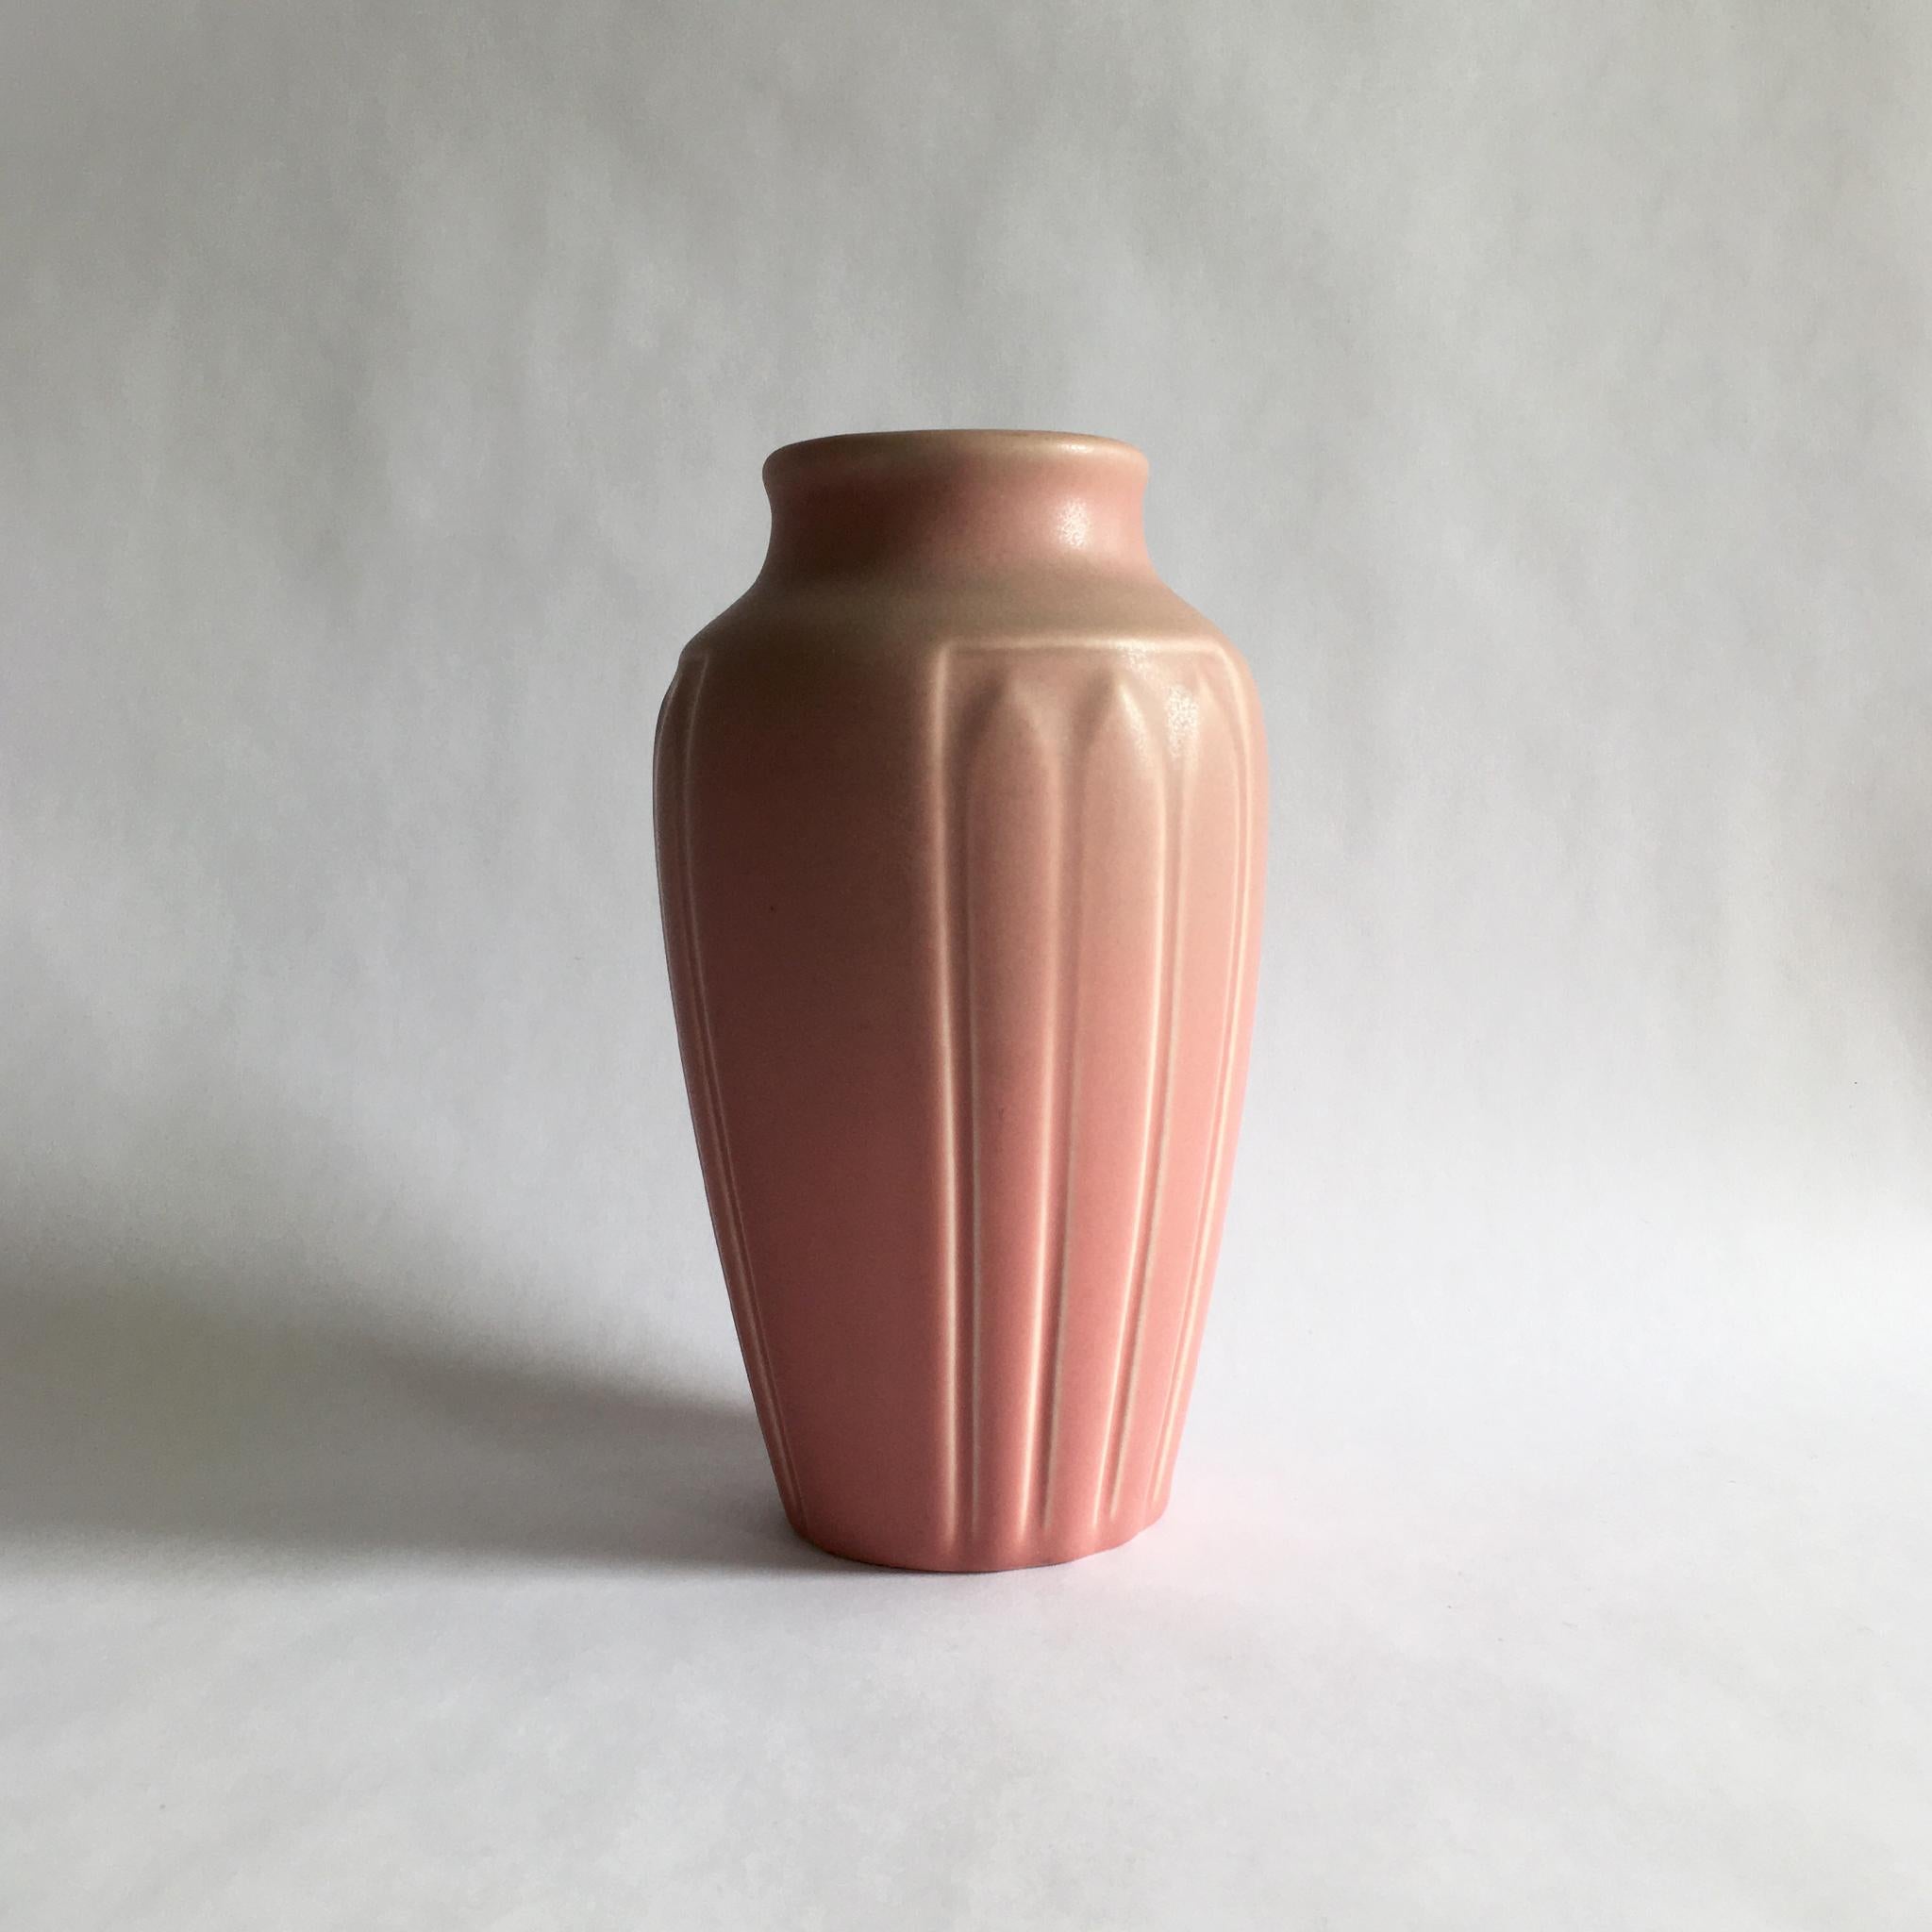 Arts & Crafts period Rookwood vase, shape 1823 in lotus leaf pattern. Matte rose glaze. Circa 1928, as marked on bottom as XXVIII.

Measures: H 7